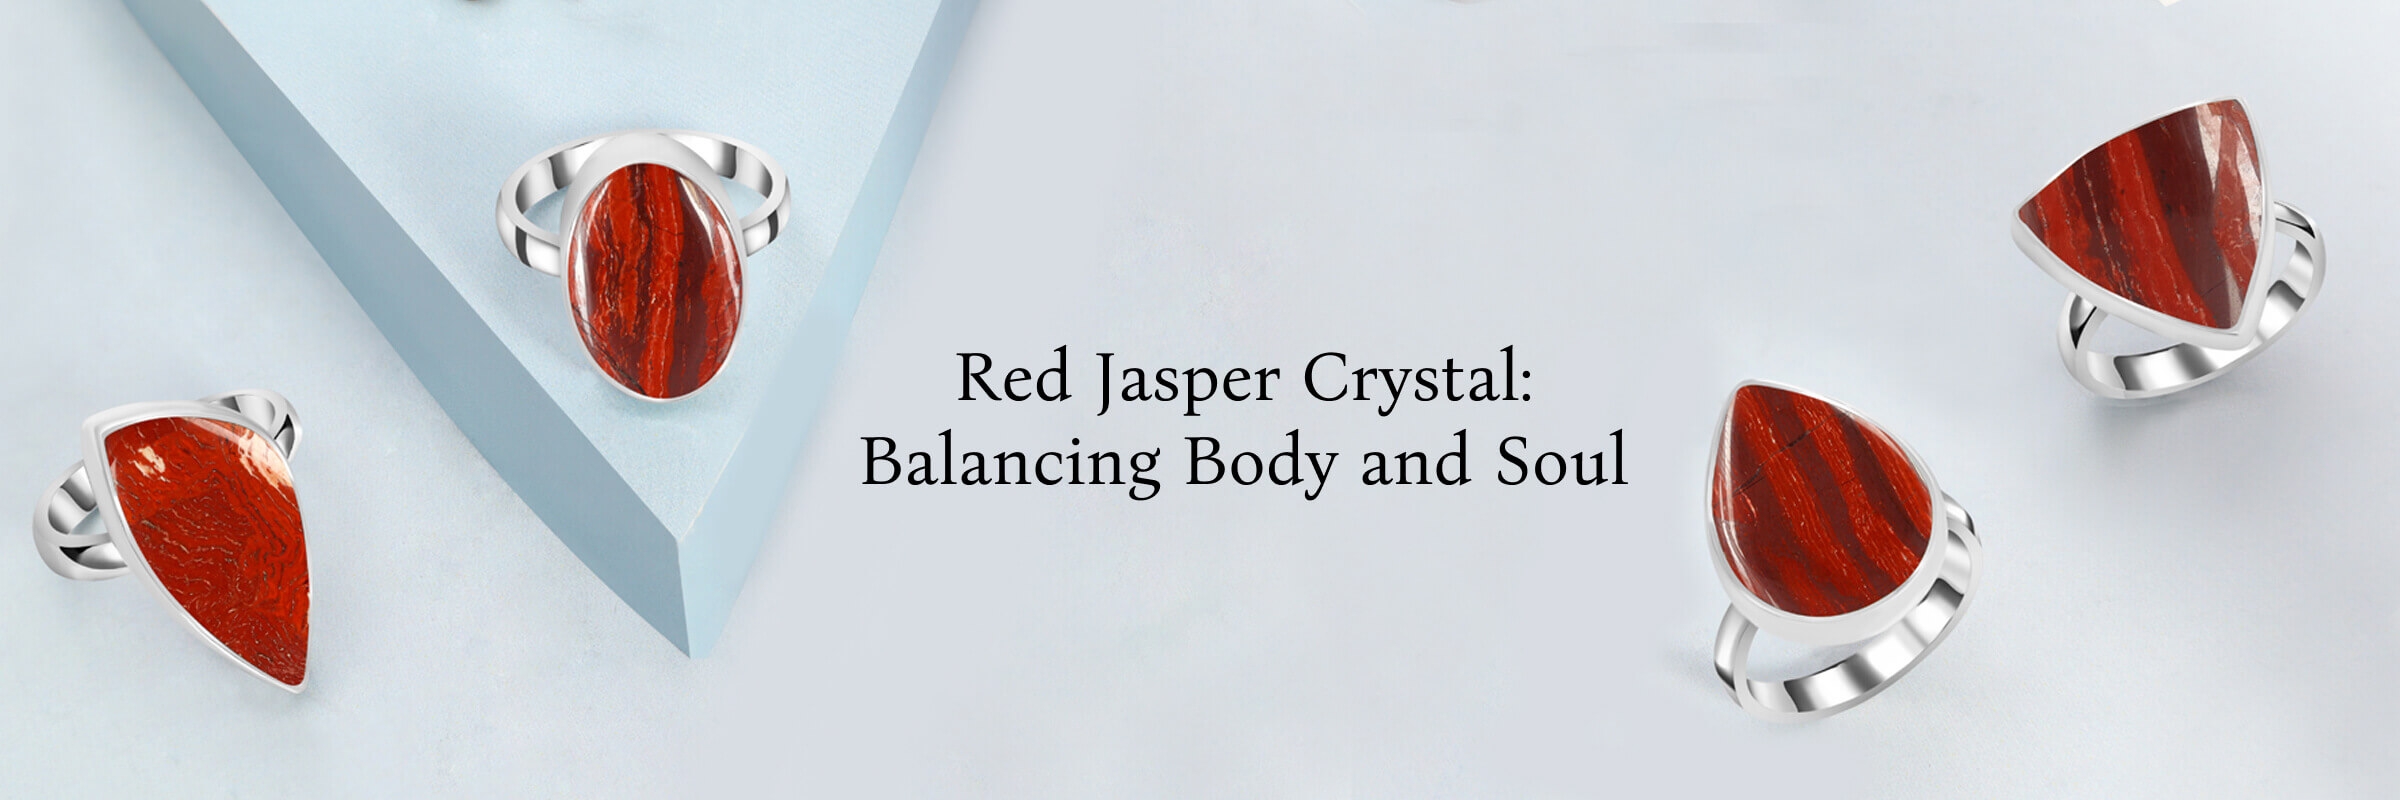 Heal Yourself Physically & Emotionally With Red Jasper Crystal